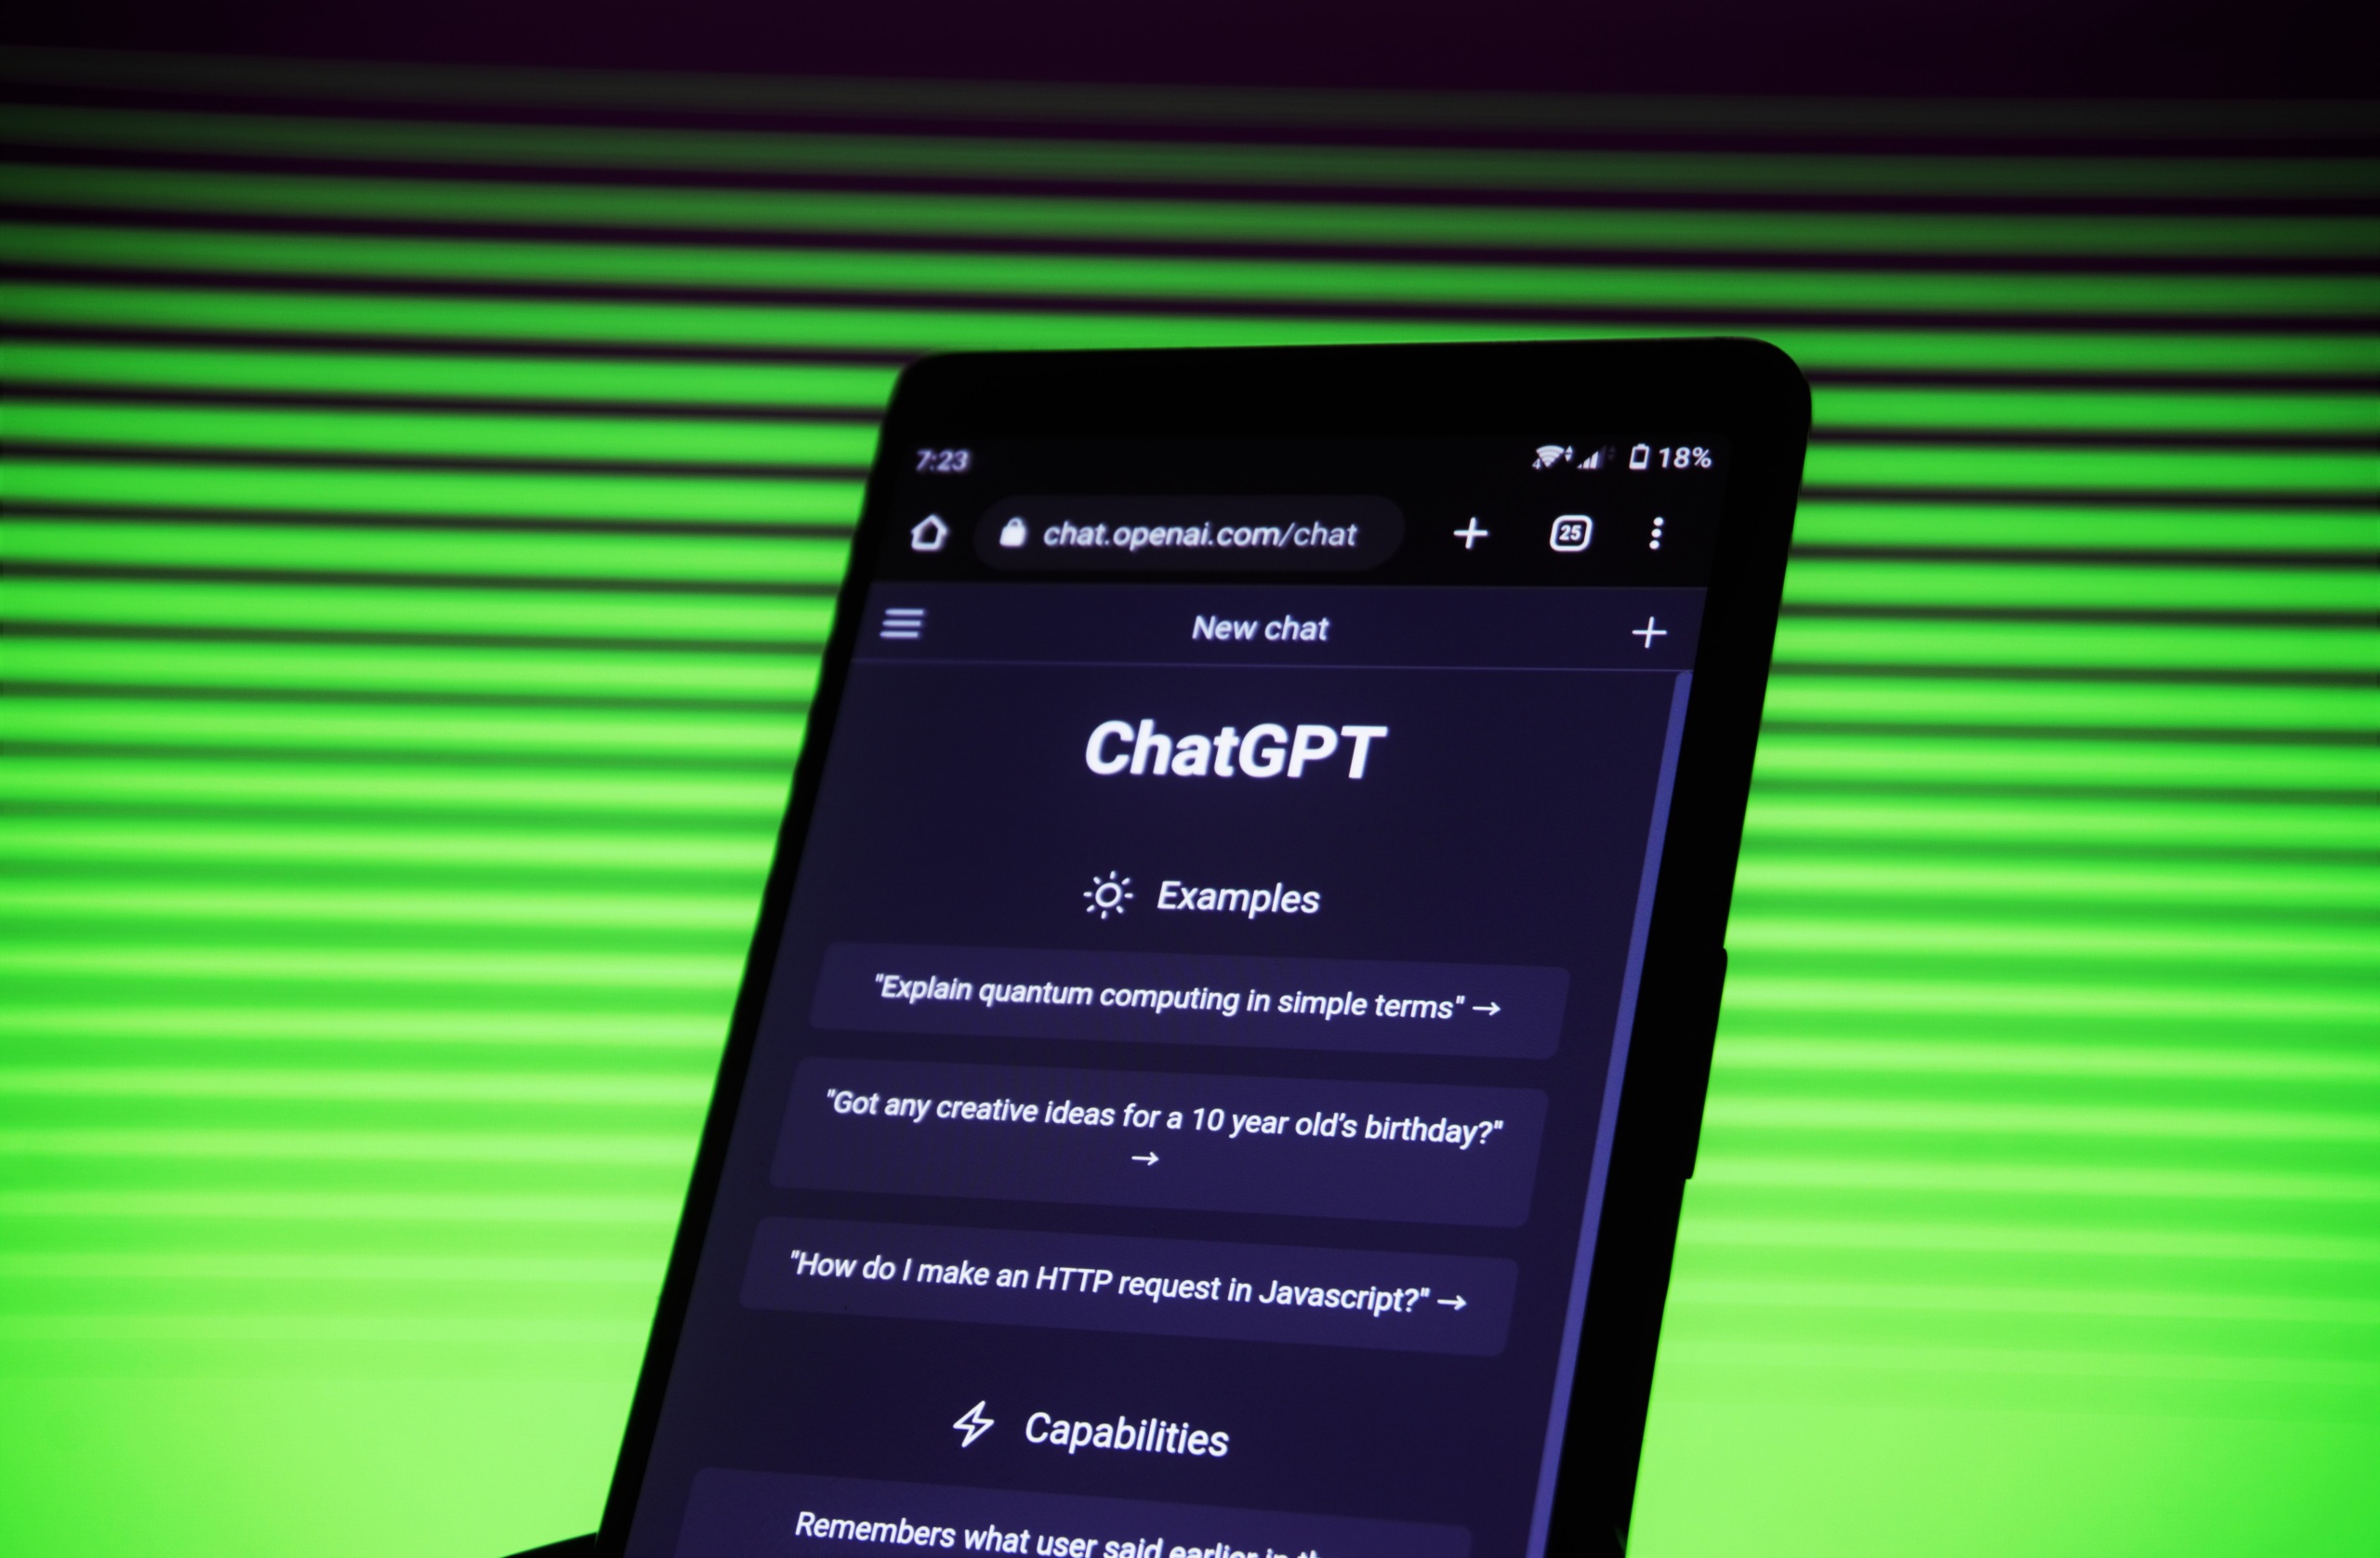 ChatGPT on phone in front of green lined screen